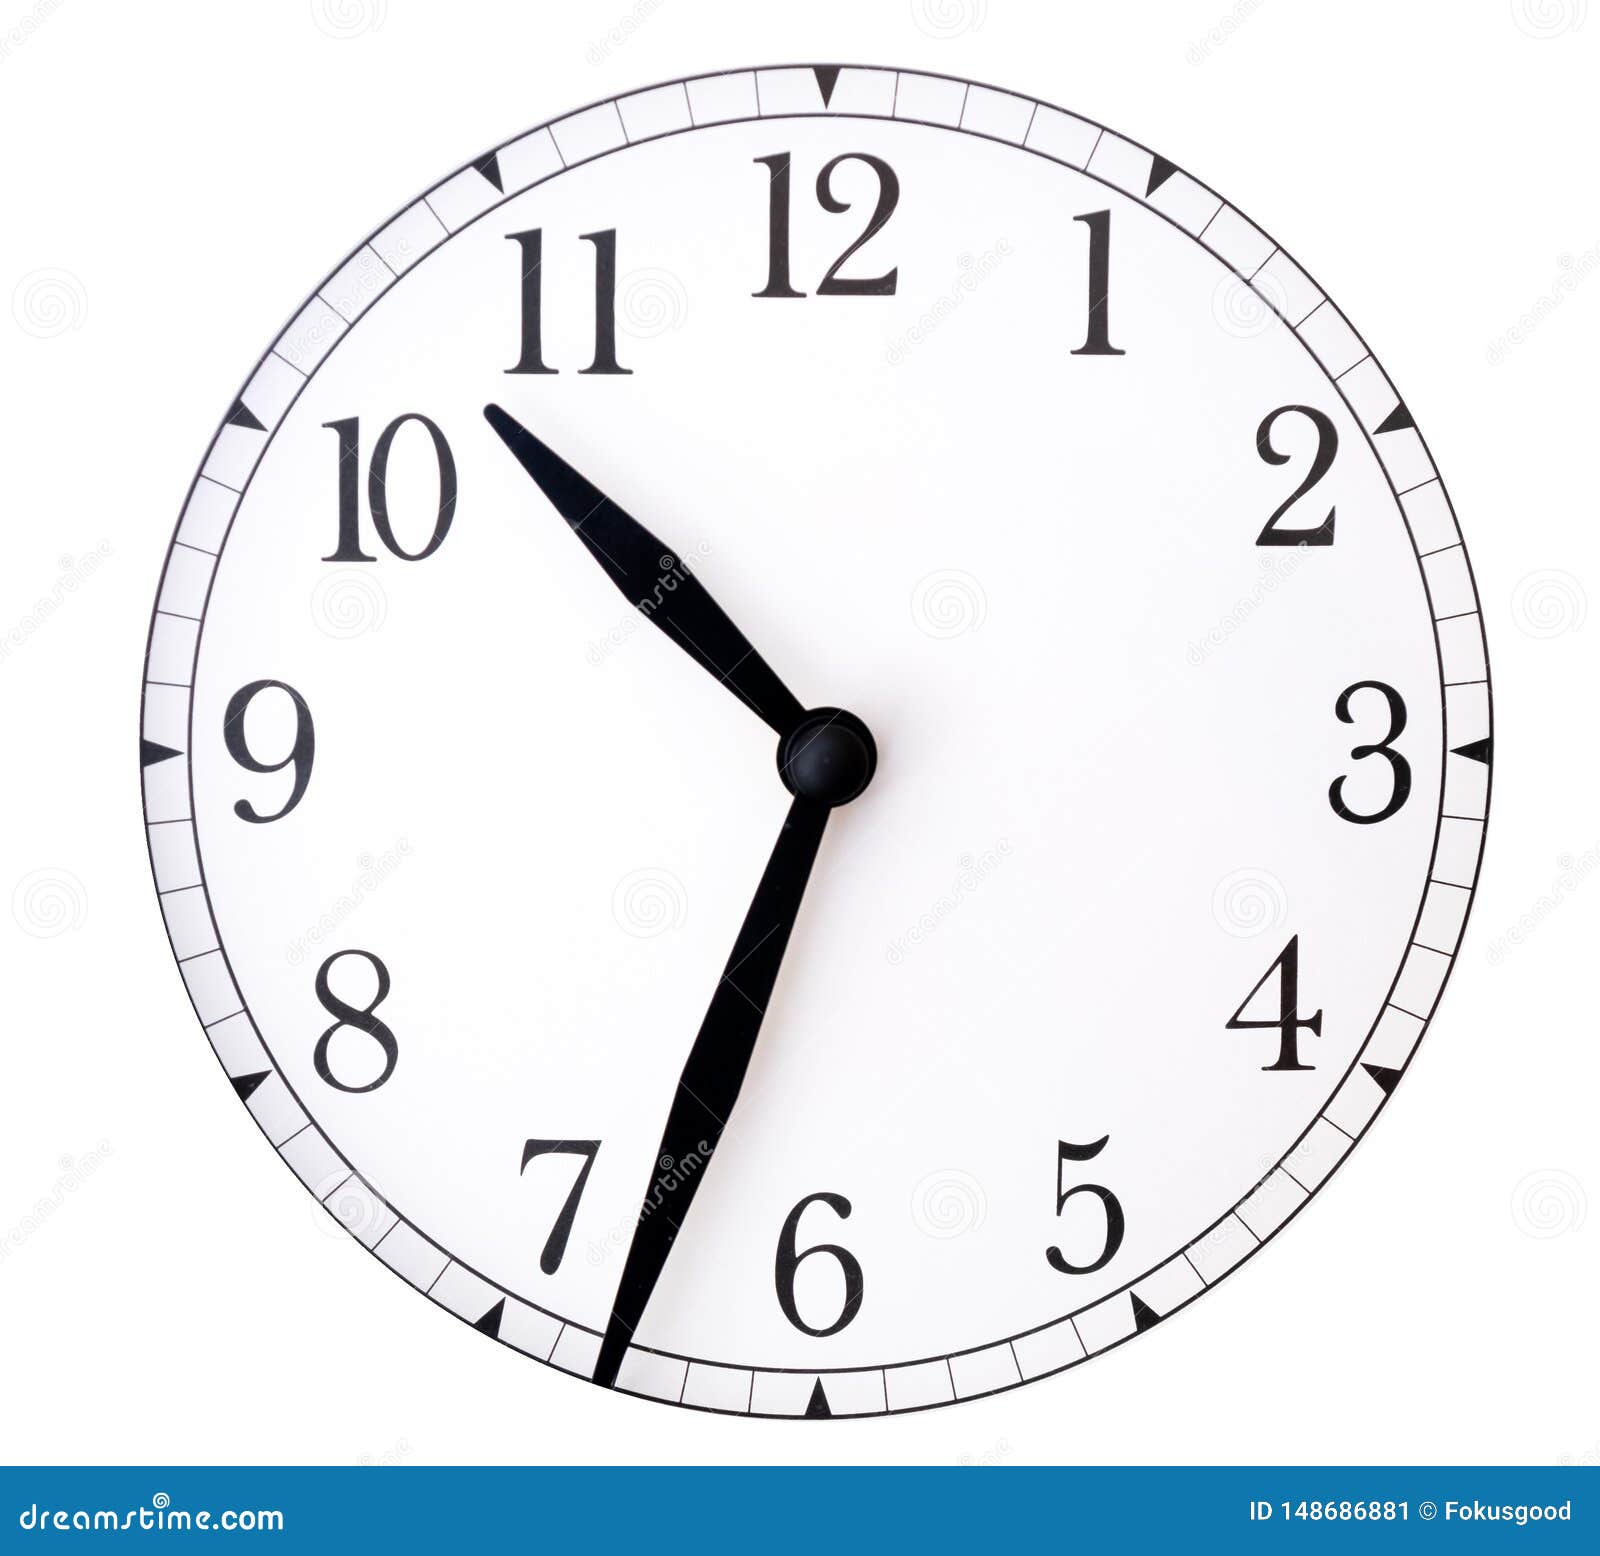 Clock Face and Hands on White Background Stock Image - Image of schedule,  dial: 148686881